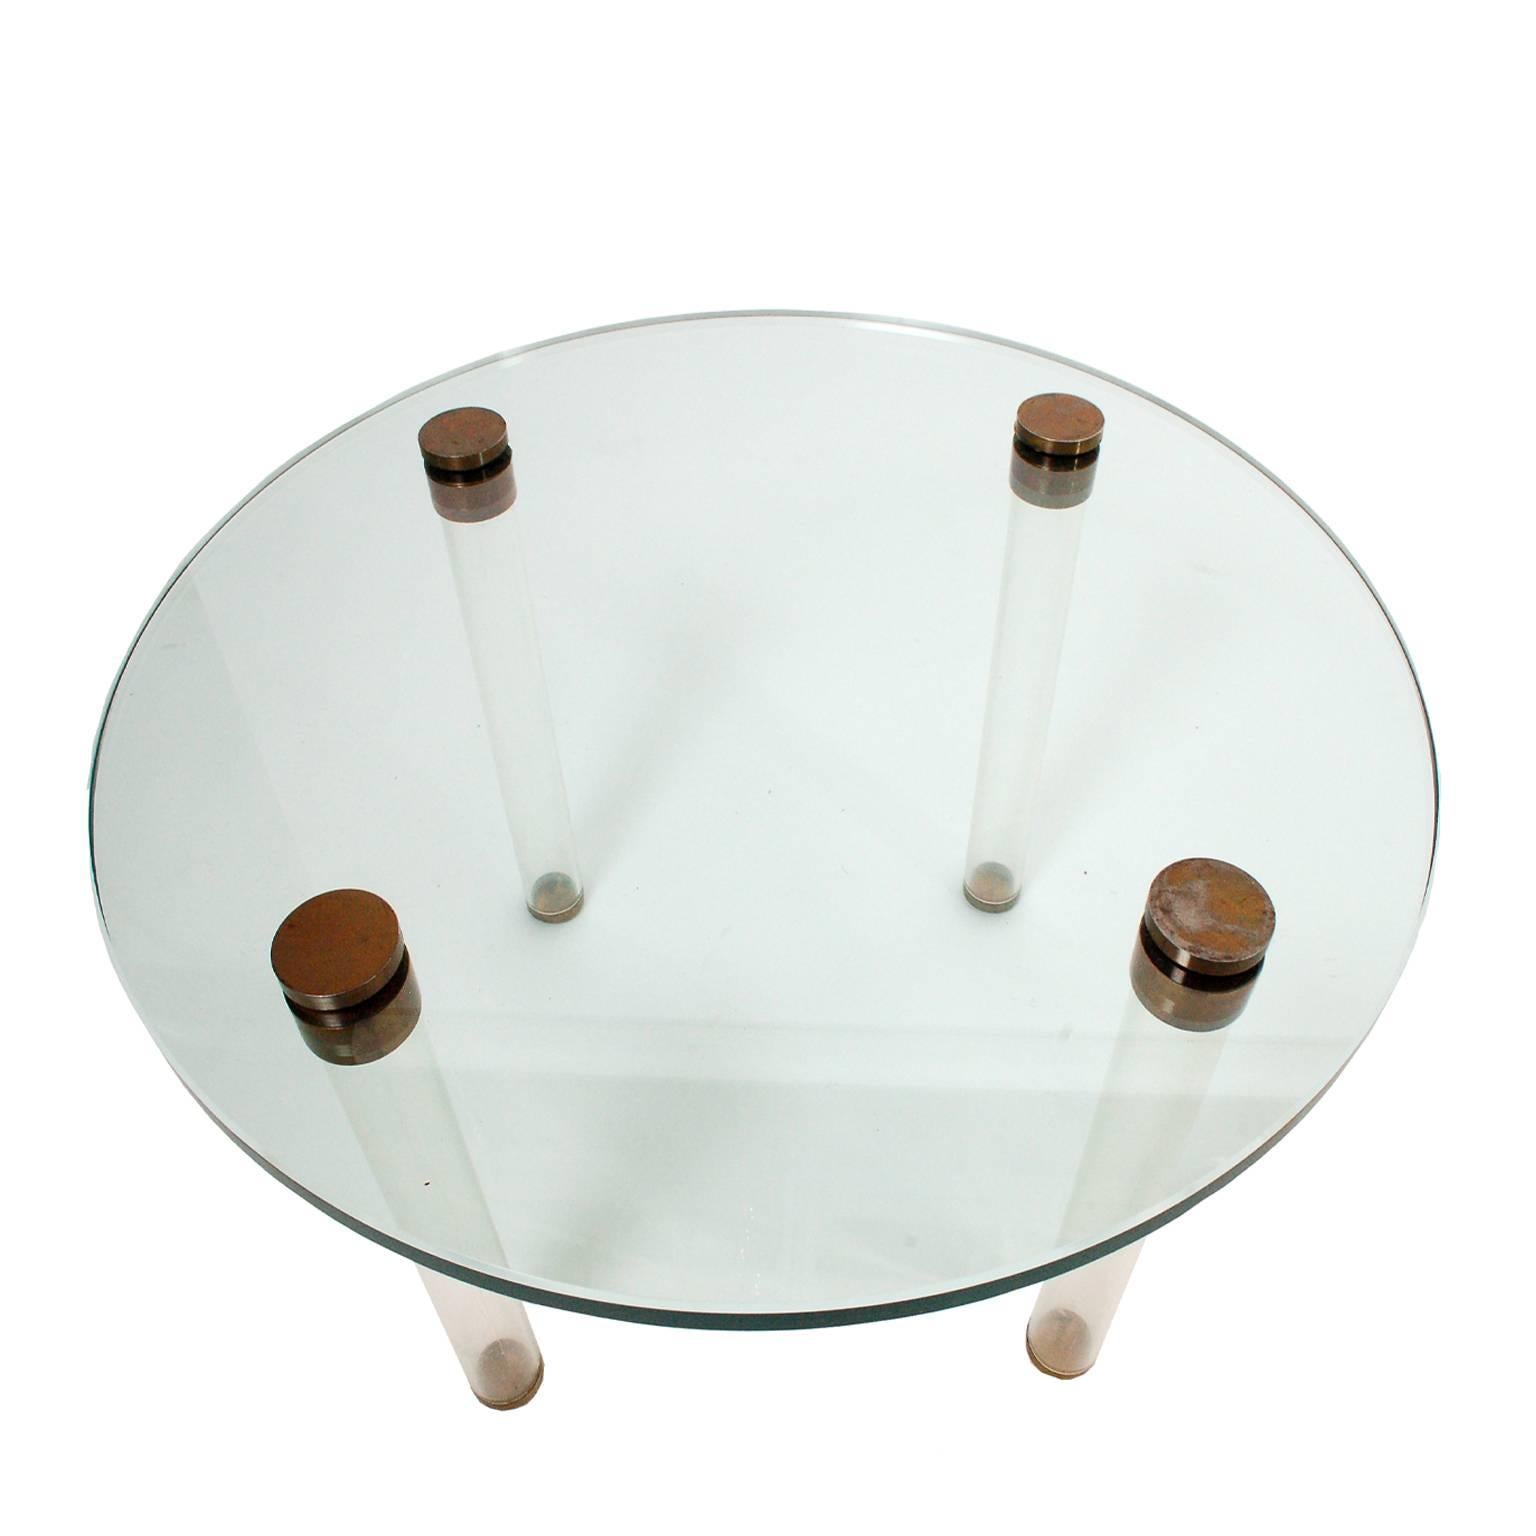 From the Luxury Group of occasional tables, this is model #3942. Round glass top on Lucite legs, metal leg attachments and glides. Innovative Rohde design for Herman Miller, 1939.